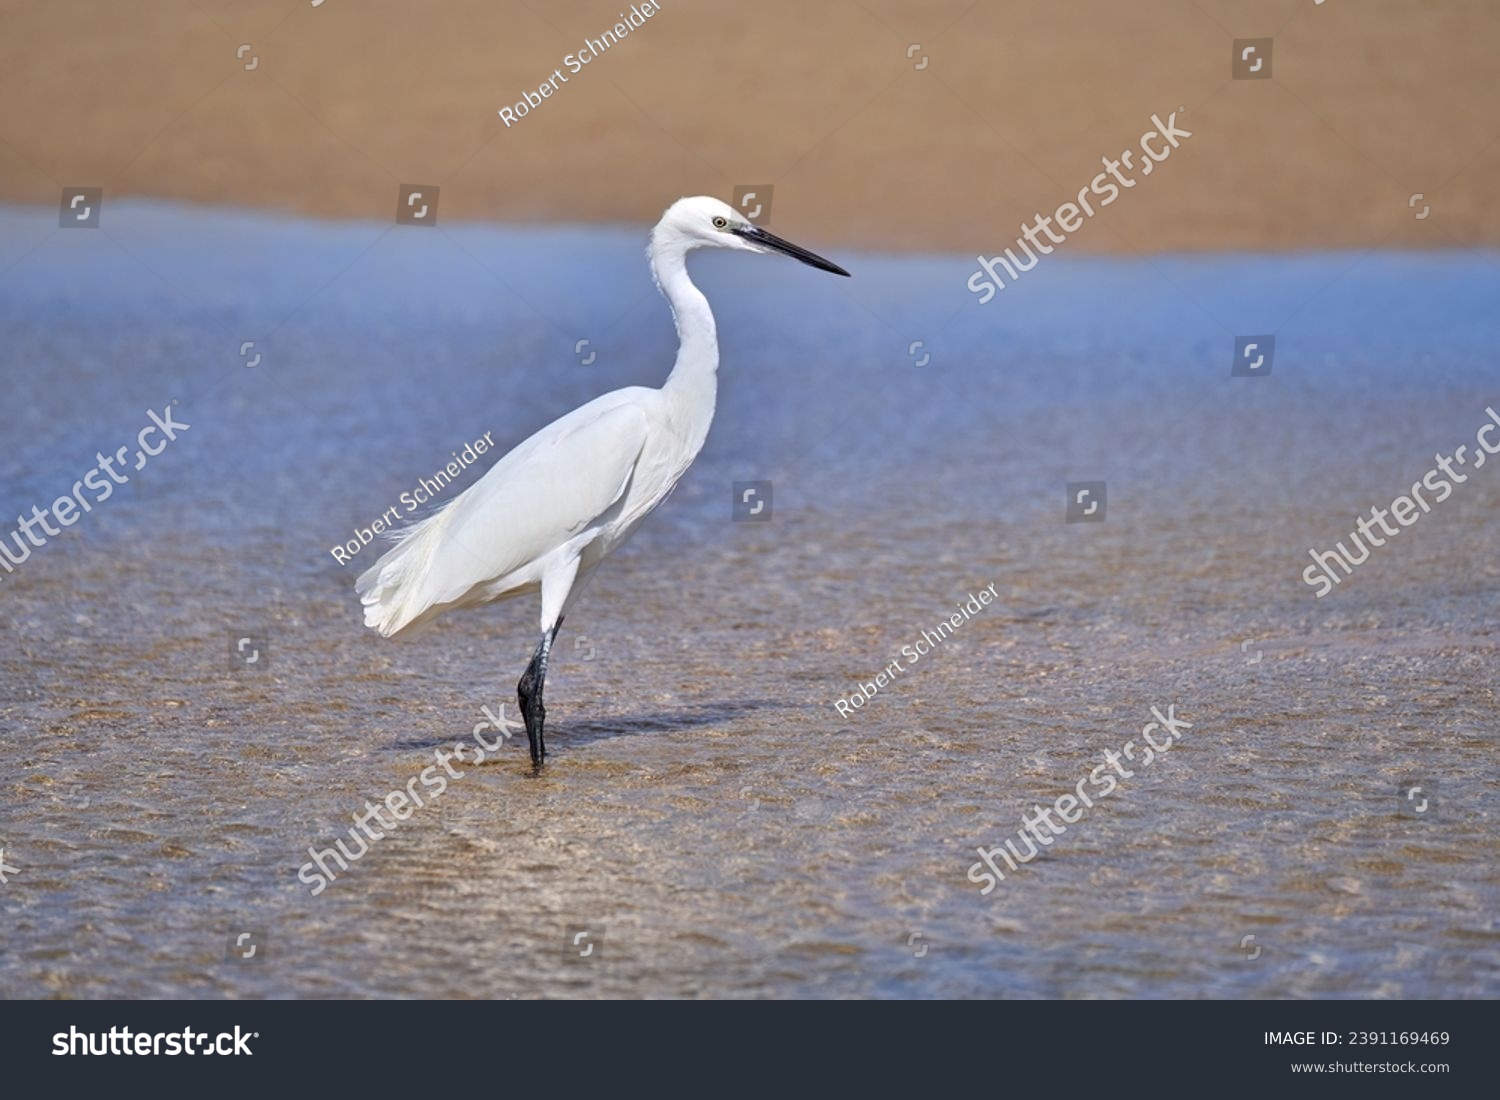 Little Egret (Egretta garzetta) standing in the shallow water of a lagoon, with brown sand in the background   #2391169469